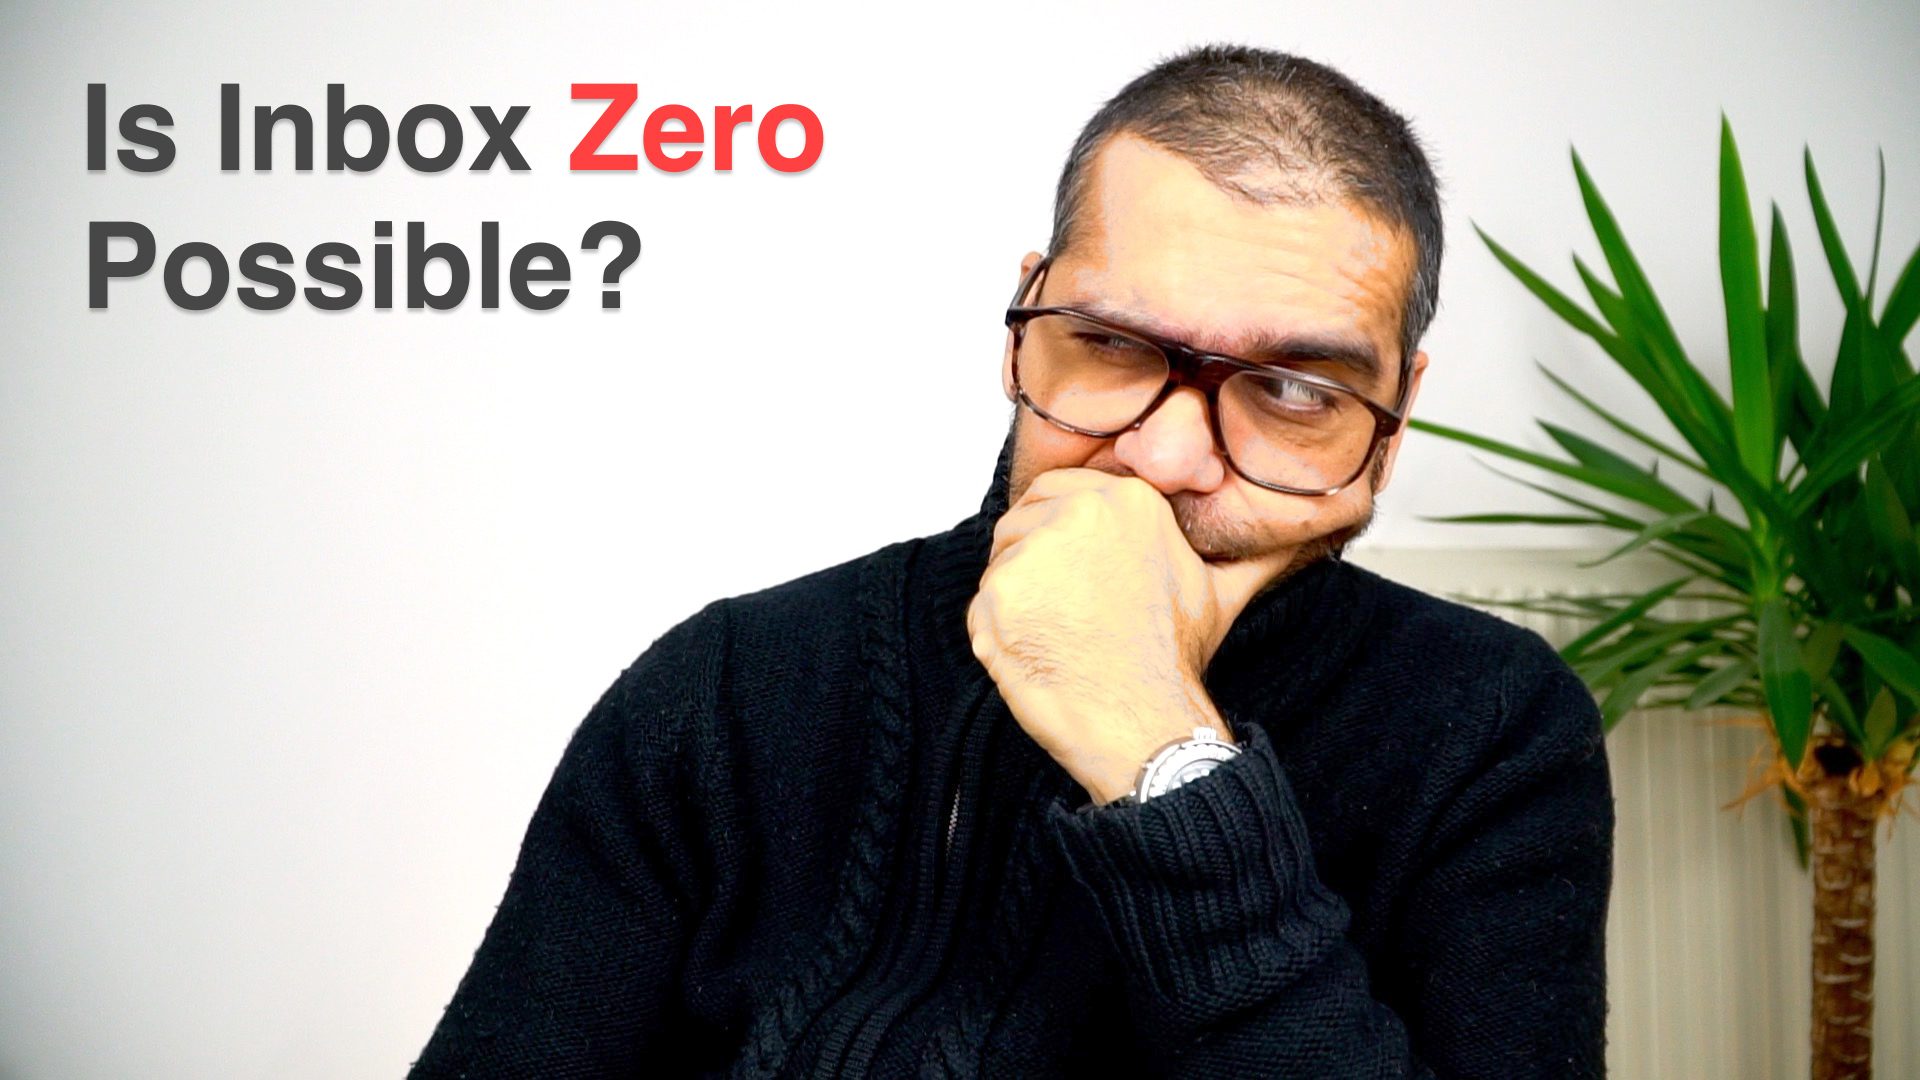 Yes, it is possible to have email inbox-zero